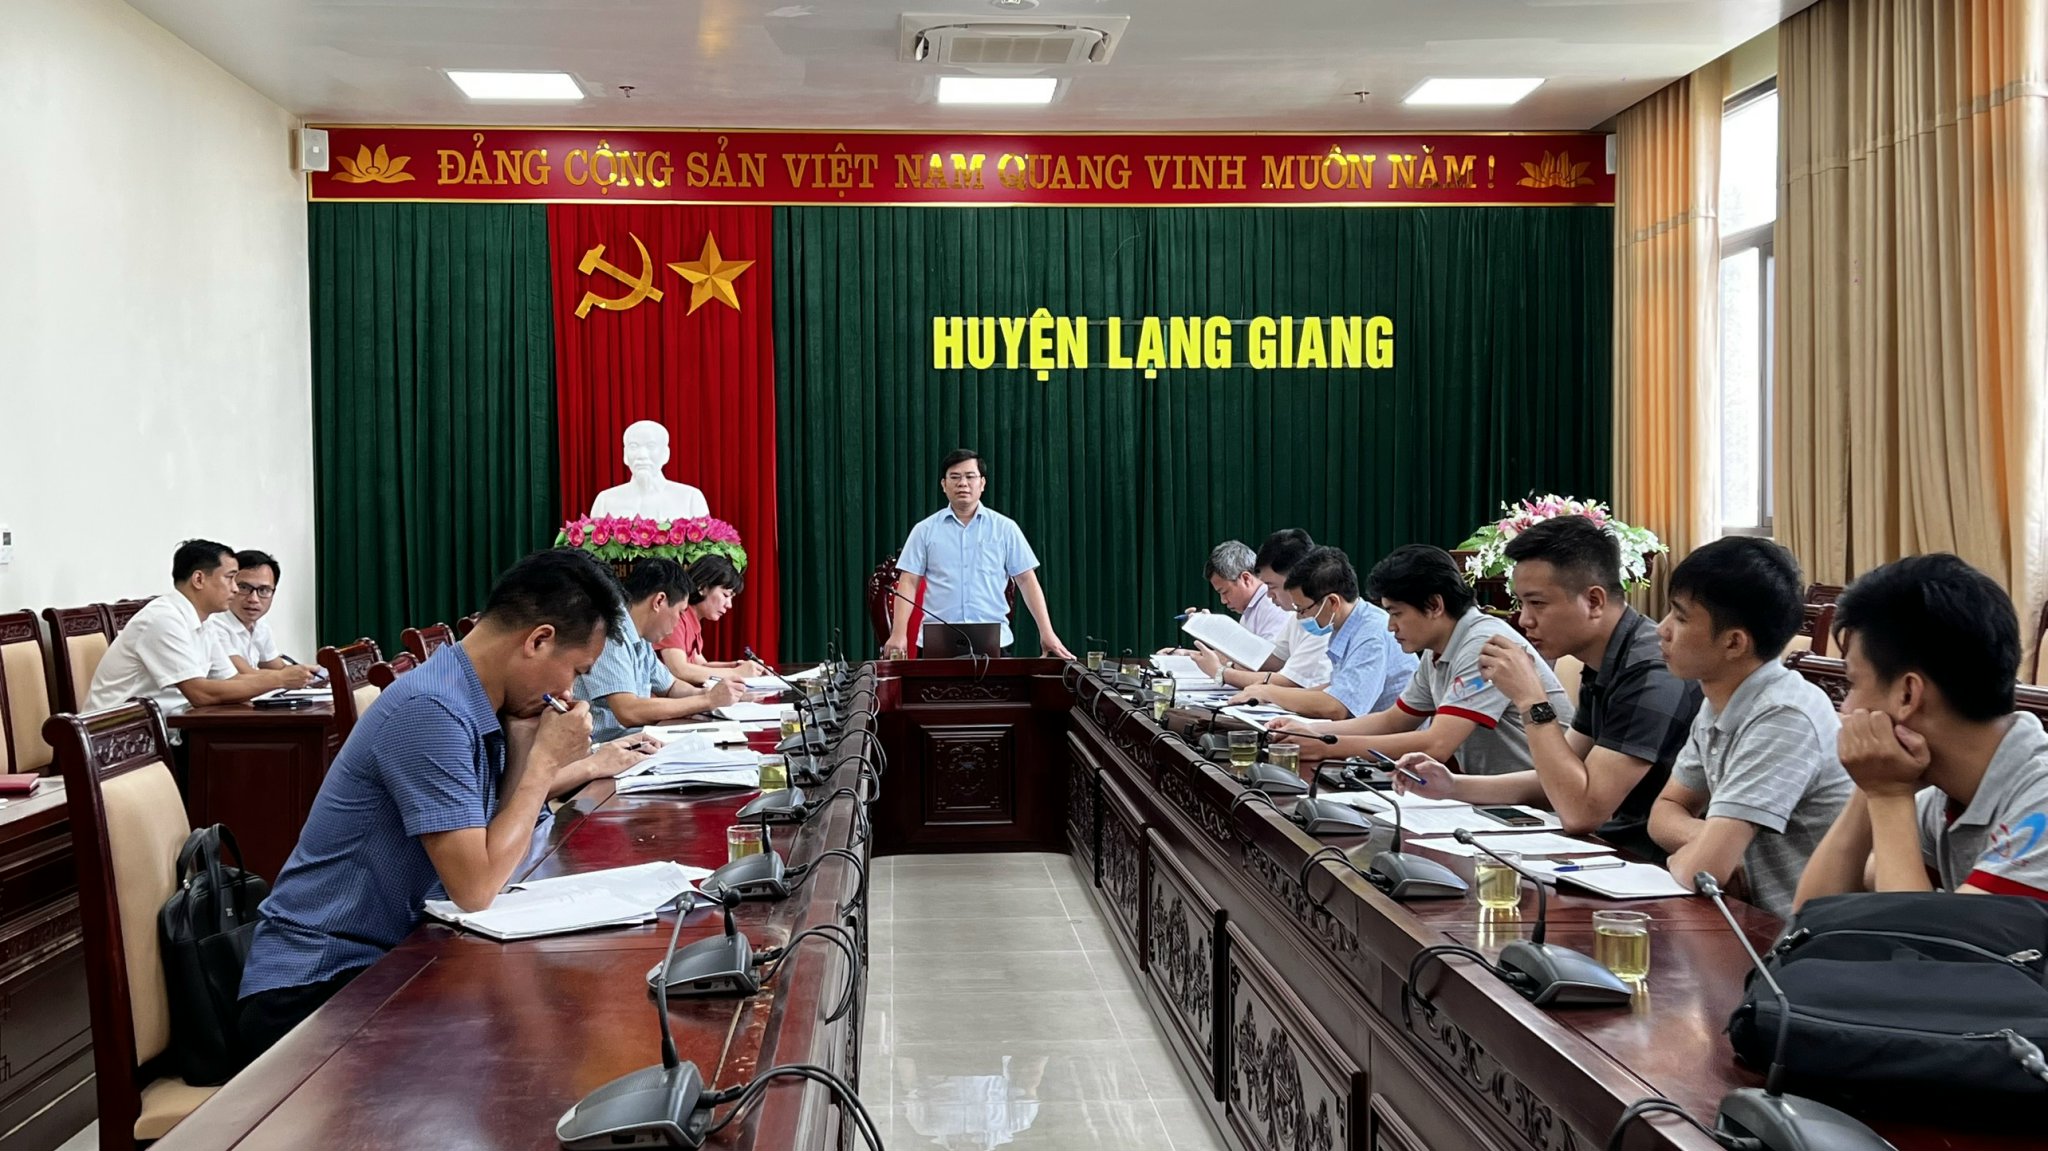 Bac Giang’s VILG Management Board inspects project implementation in the districts|https://stnmt.bacgiang.gov.vn/zh_CN/detailed-news/-/asset_publisher/u427aQT80iO6/content/bac-giang-s-vilg-management-board-inspects-project-implementation-in-the-districts